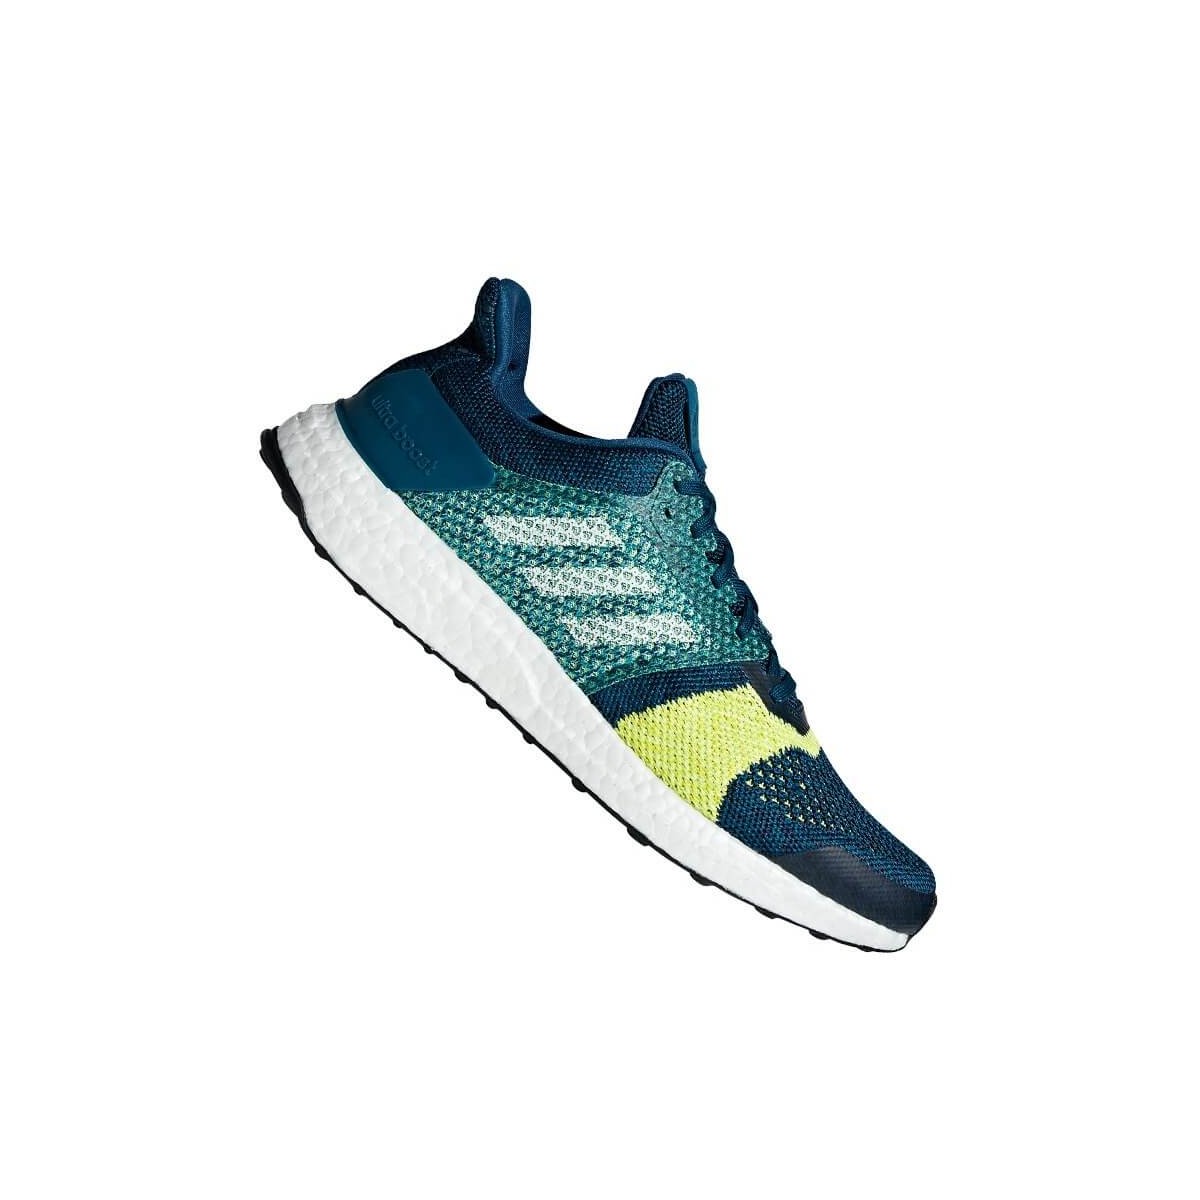 Adidas Ultra Boost ST Men's Shoes Blue Yellow Green PV19